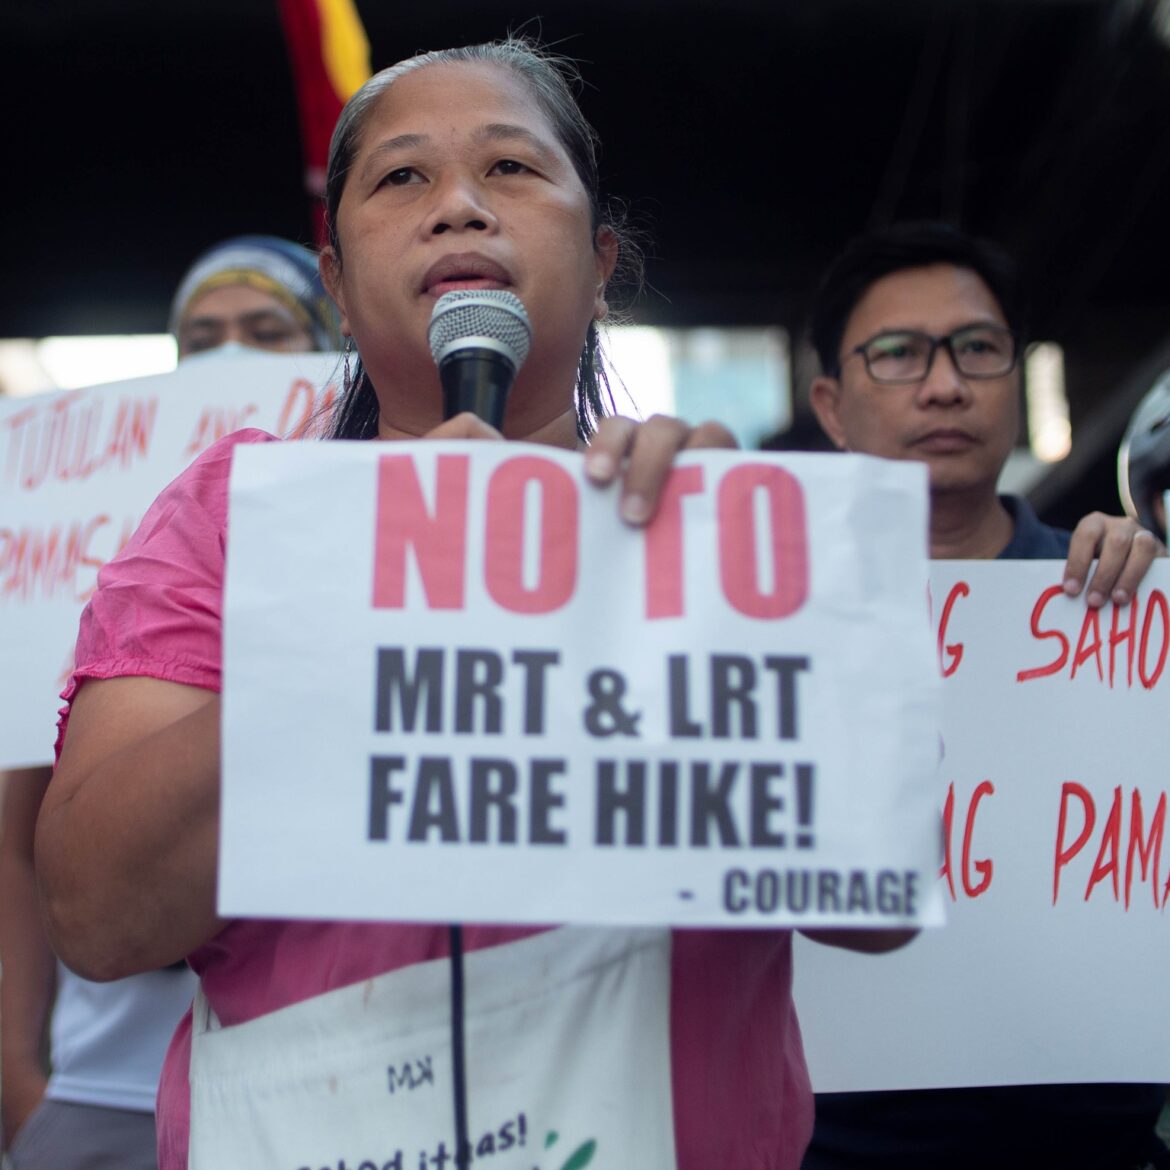 Wage hike, not fare hike: Kadamay opposes planned MRT, LRT fare increase